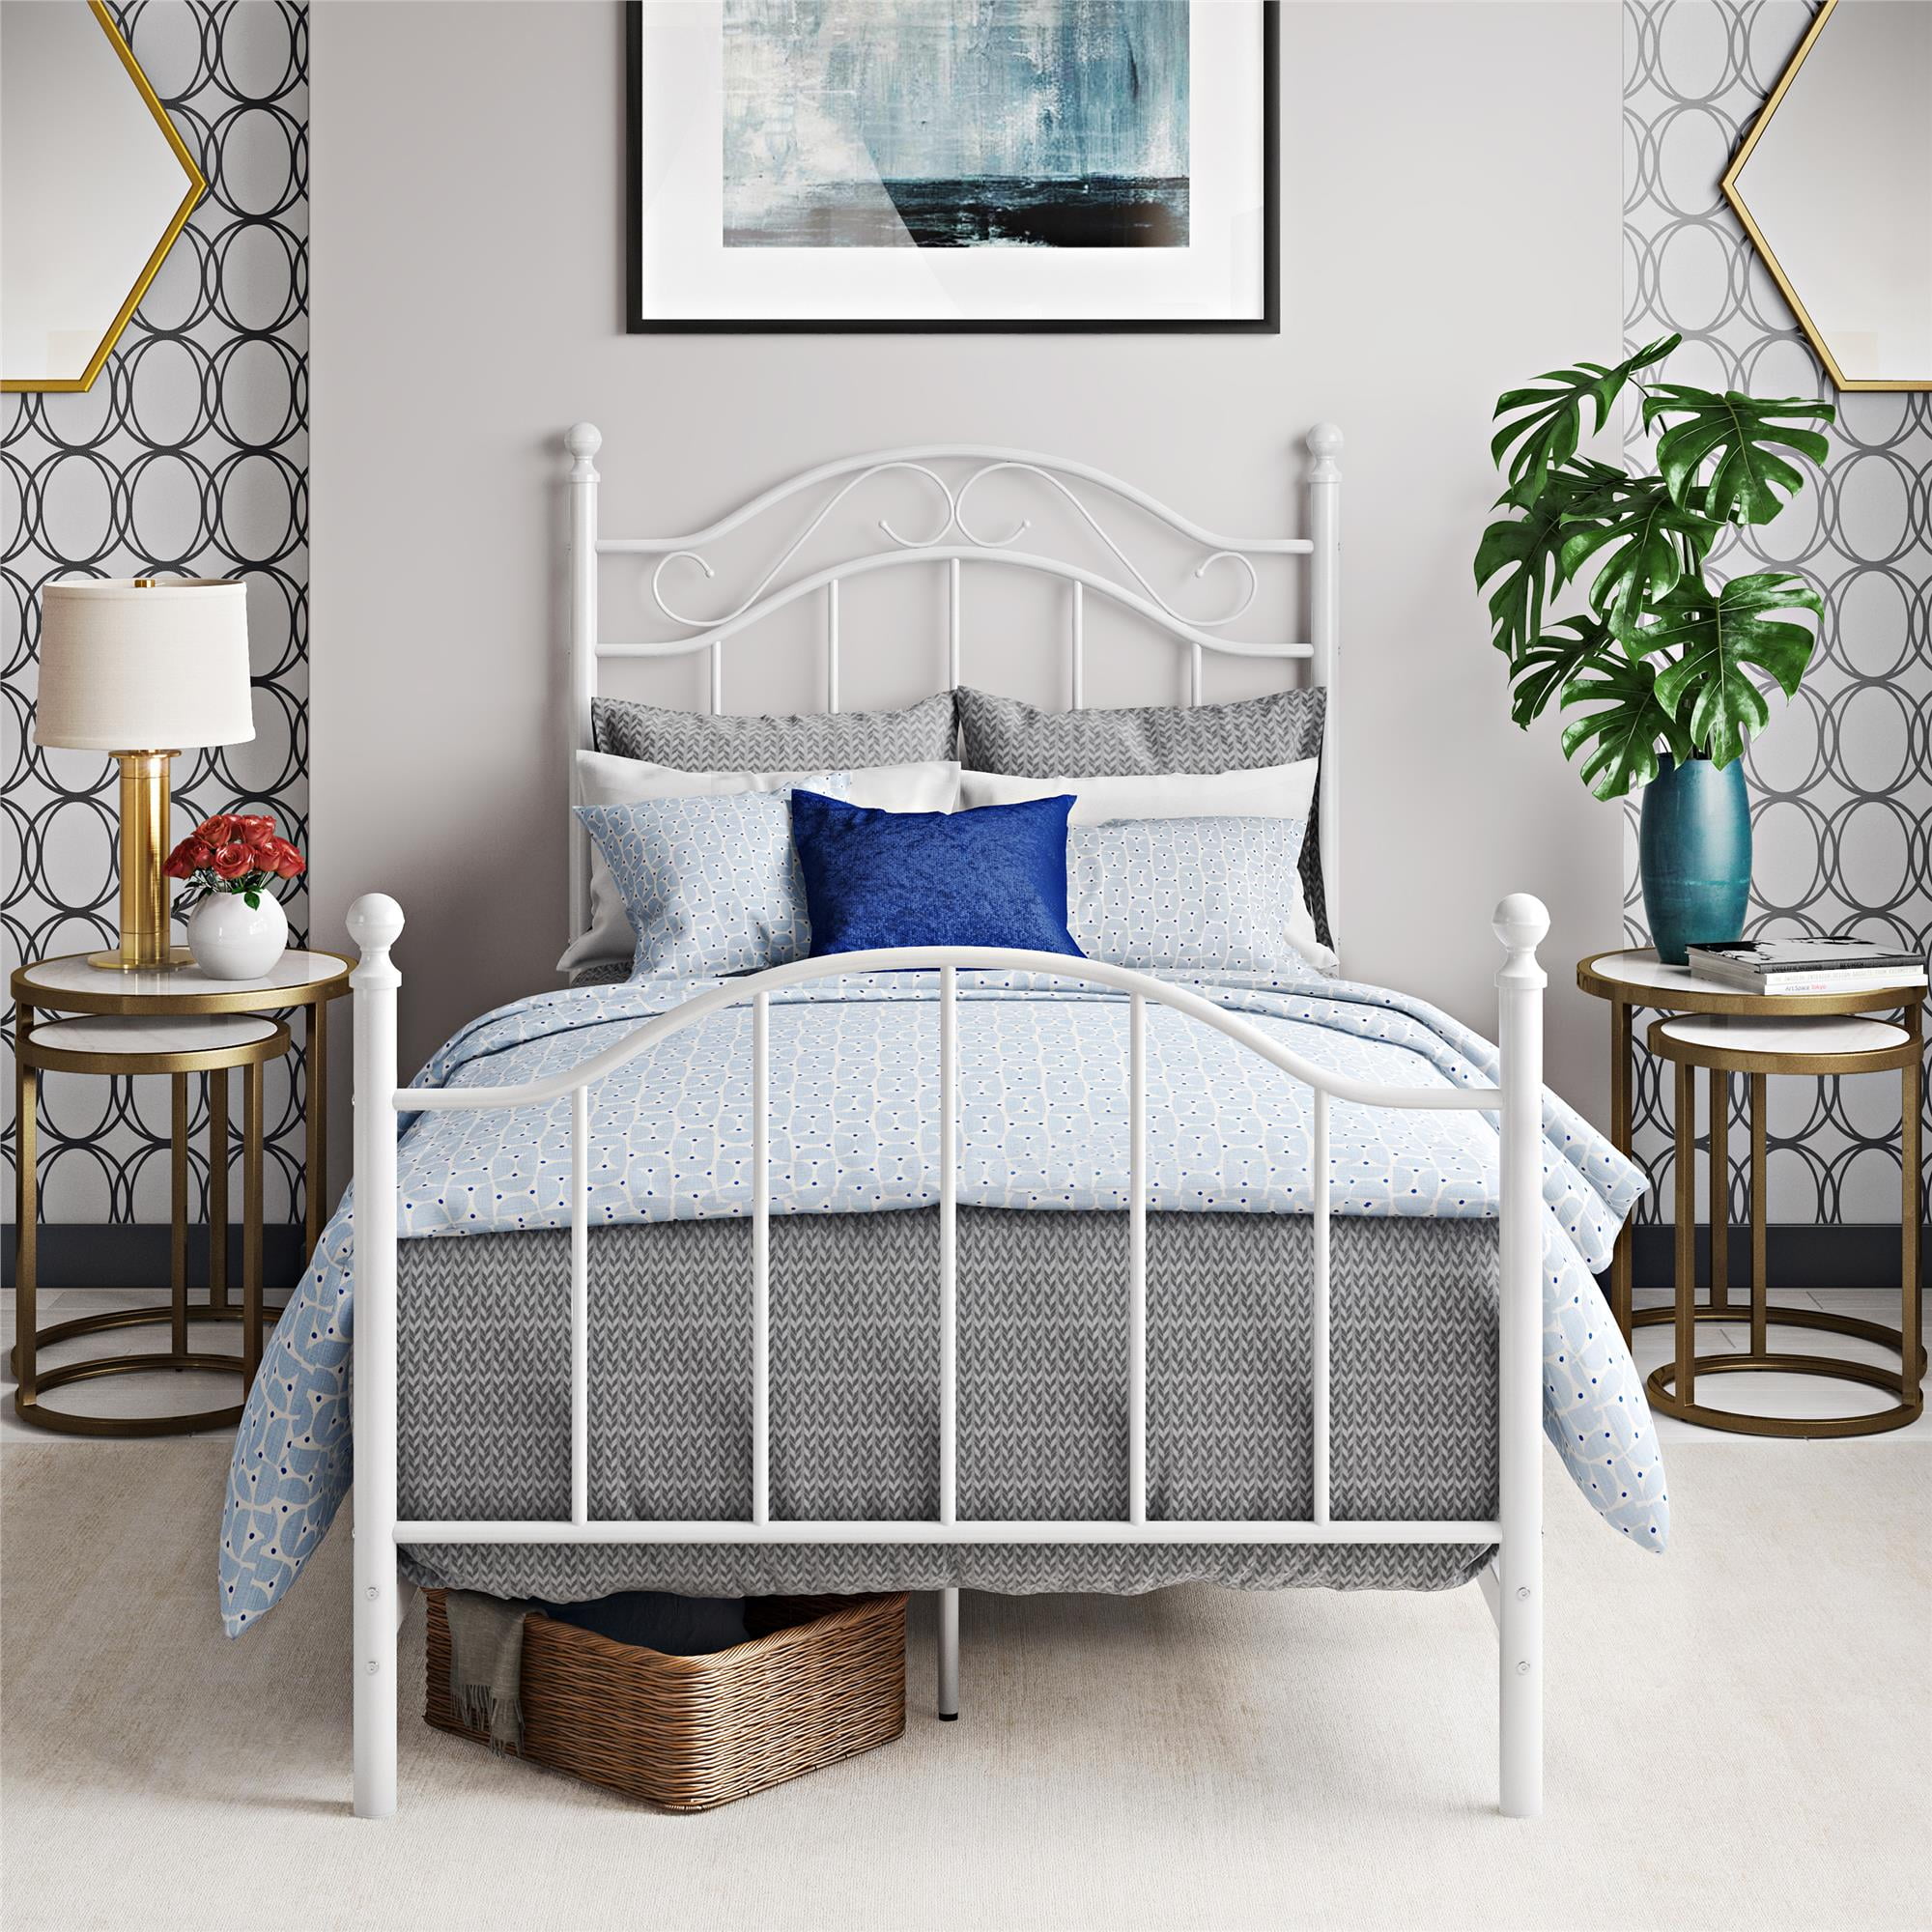 Mainstays Traditional Metal Bed with Headboard, Twin, White - Walmart.com